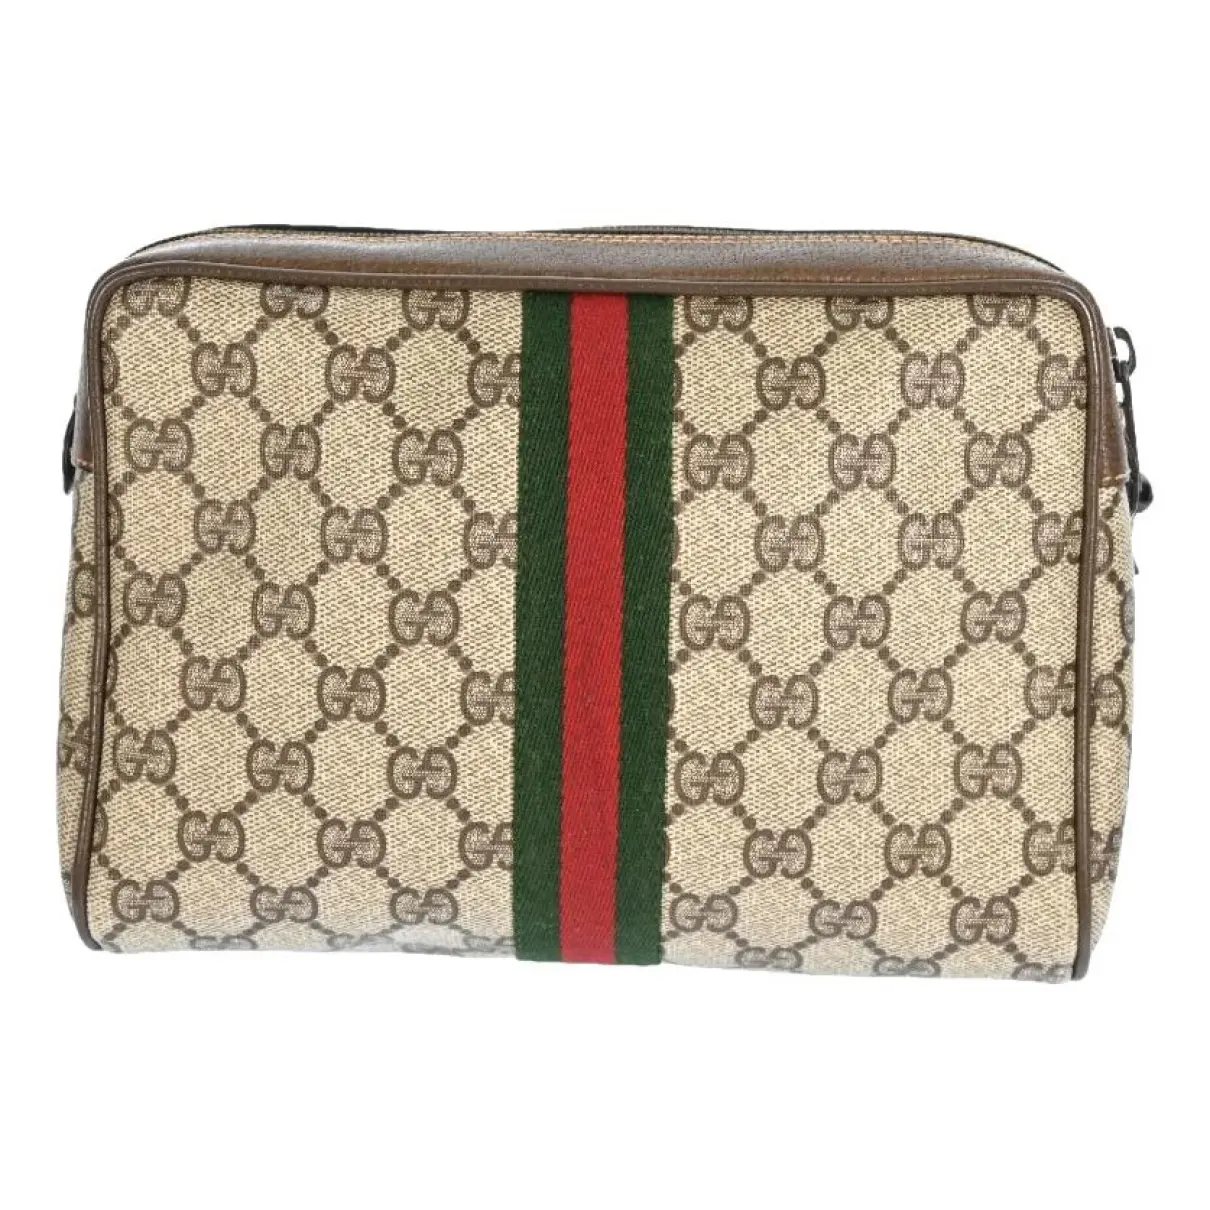 Ophidia patent leather clutch bag Gucci